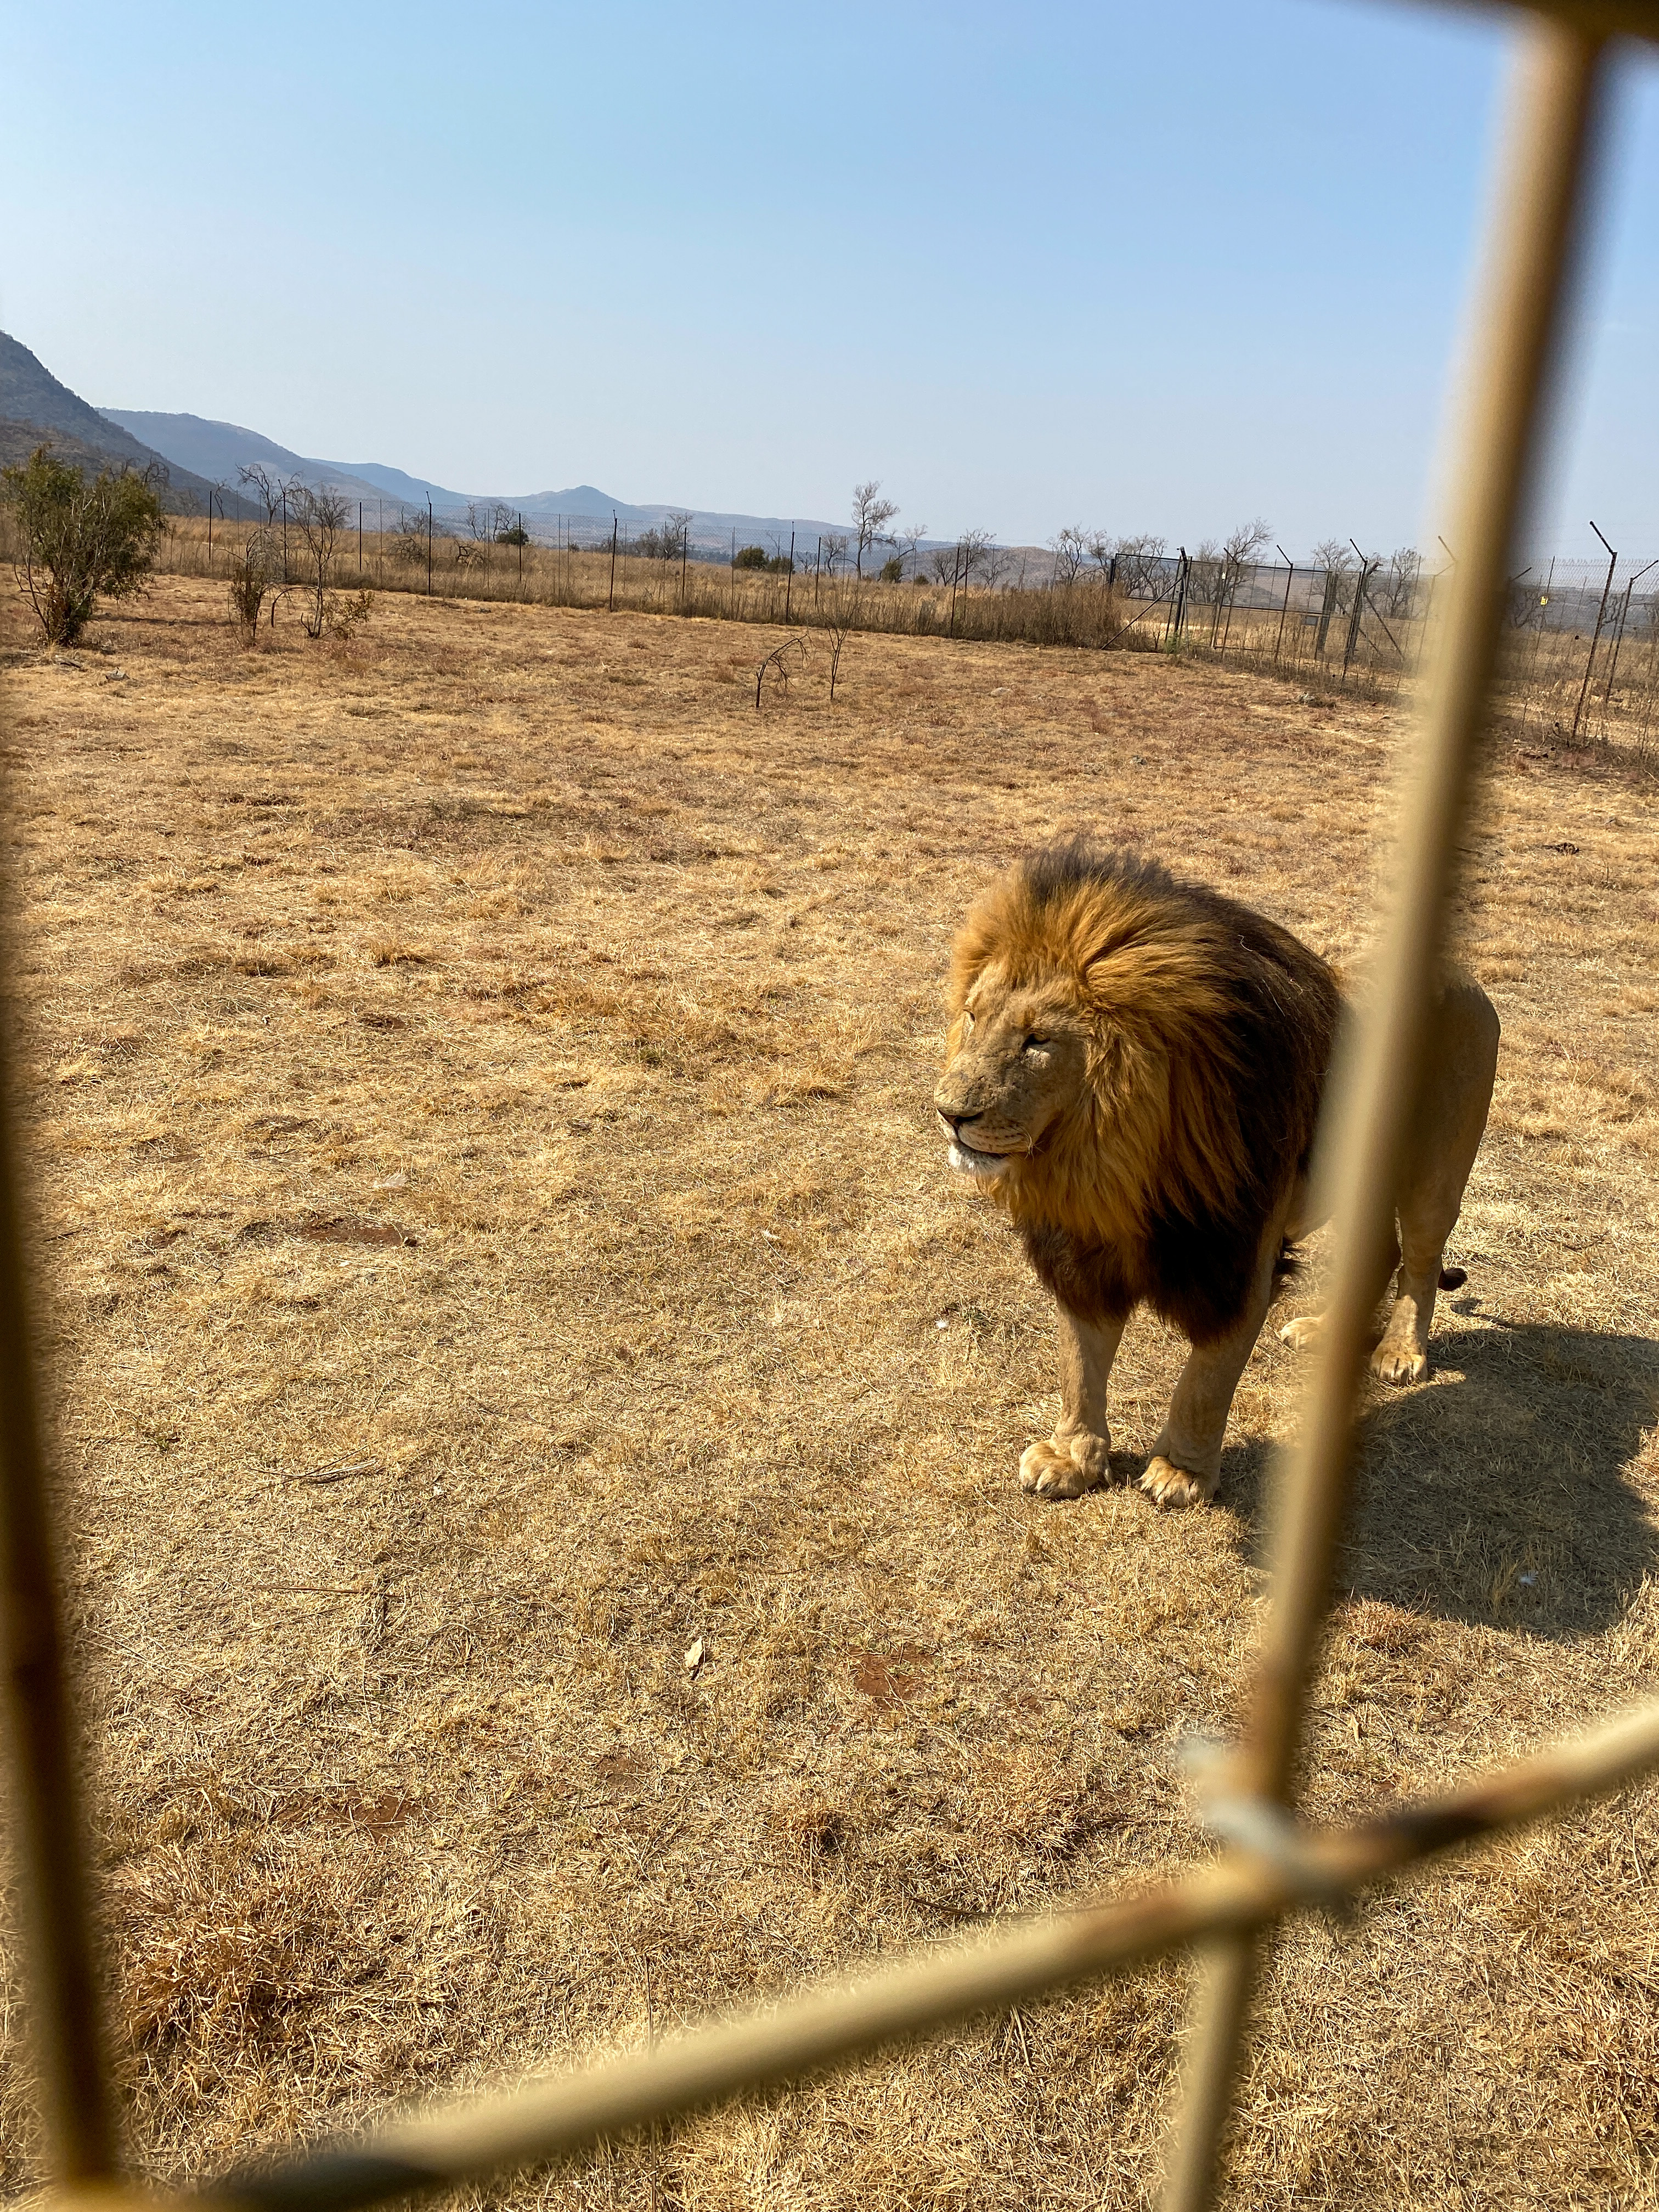 Lion & Safari Park - Things to Do in Johannesburg